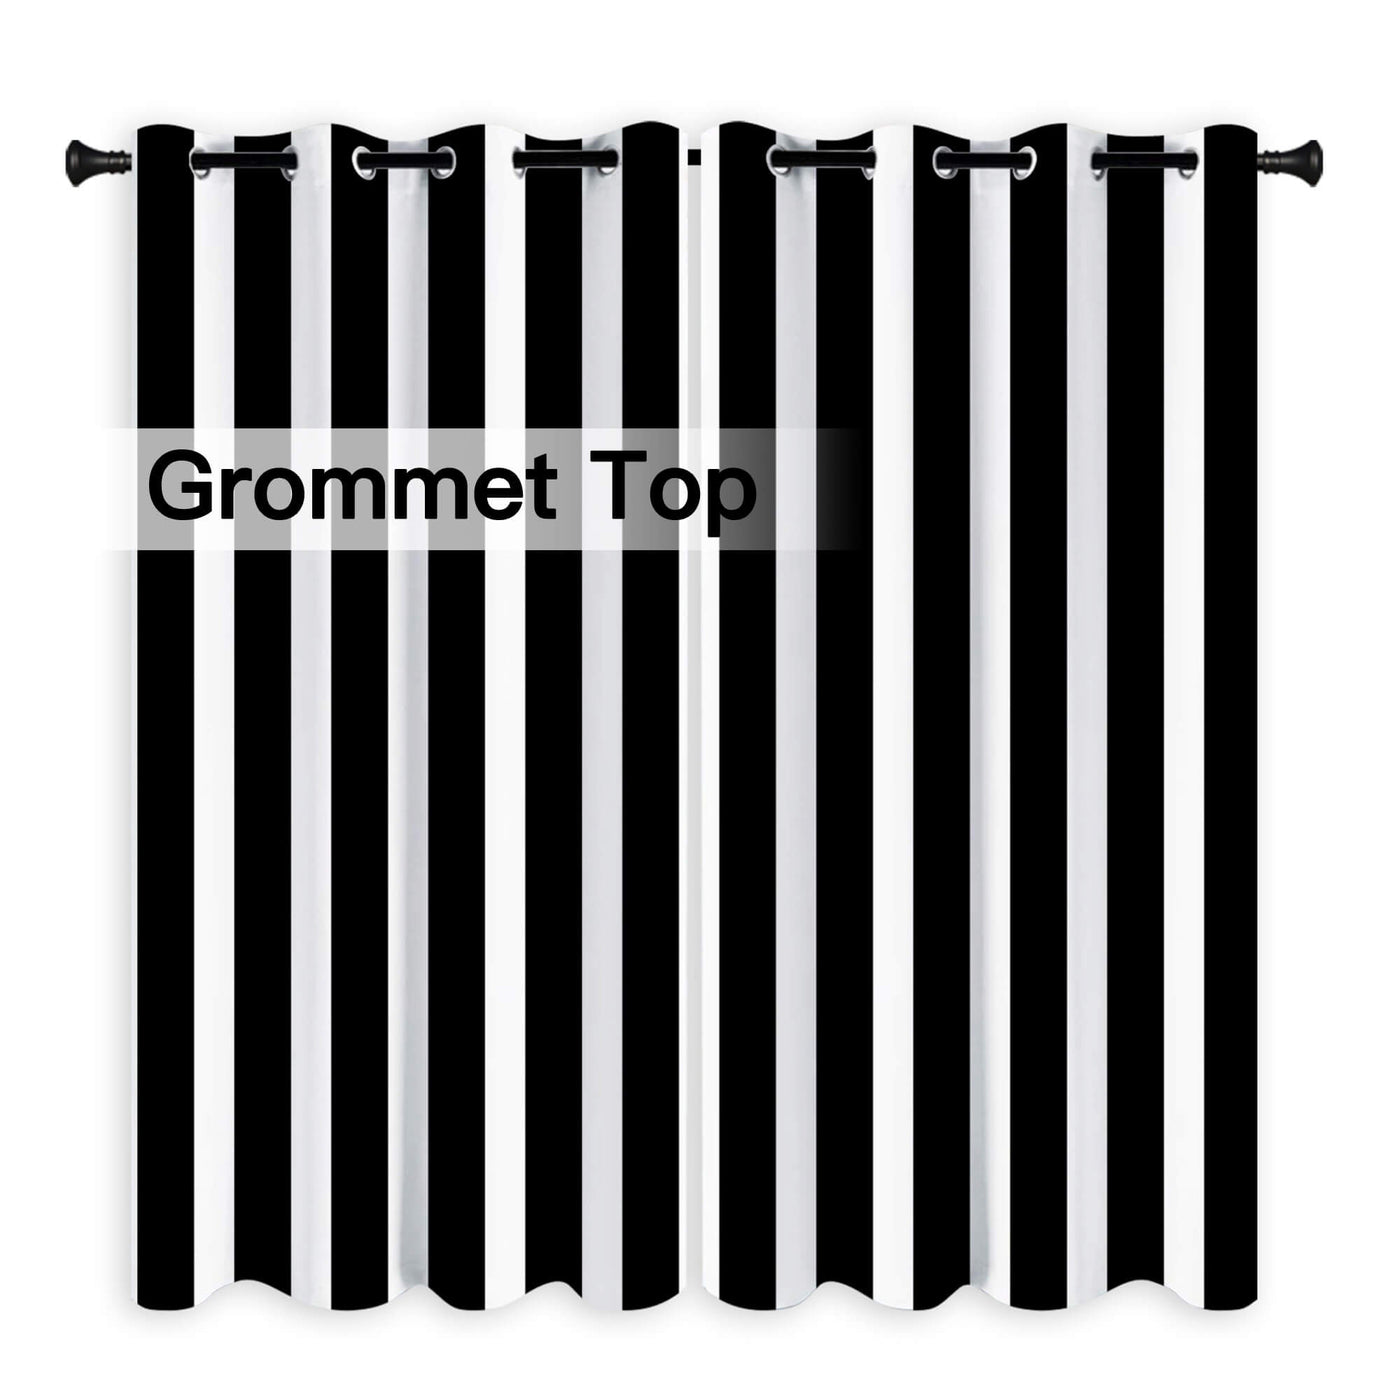 Heartcosy Black Stripe Curtains/Drapes 1 Panel | Waterproof Curtains Grommet Top & Bottom | Custom Outdoor Curtains